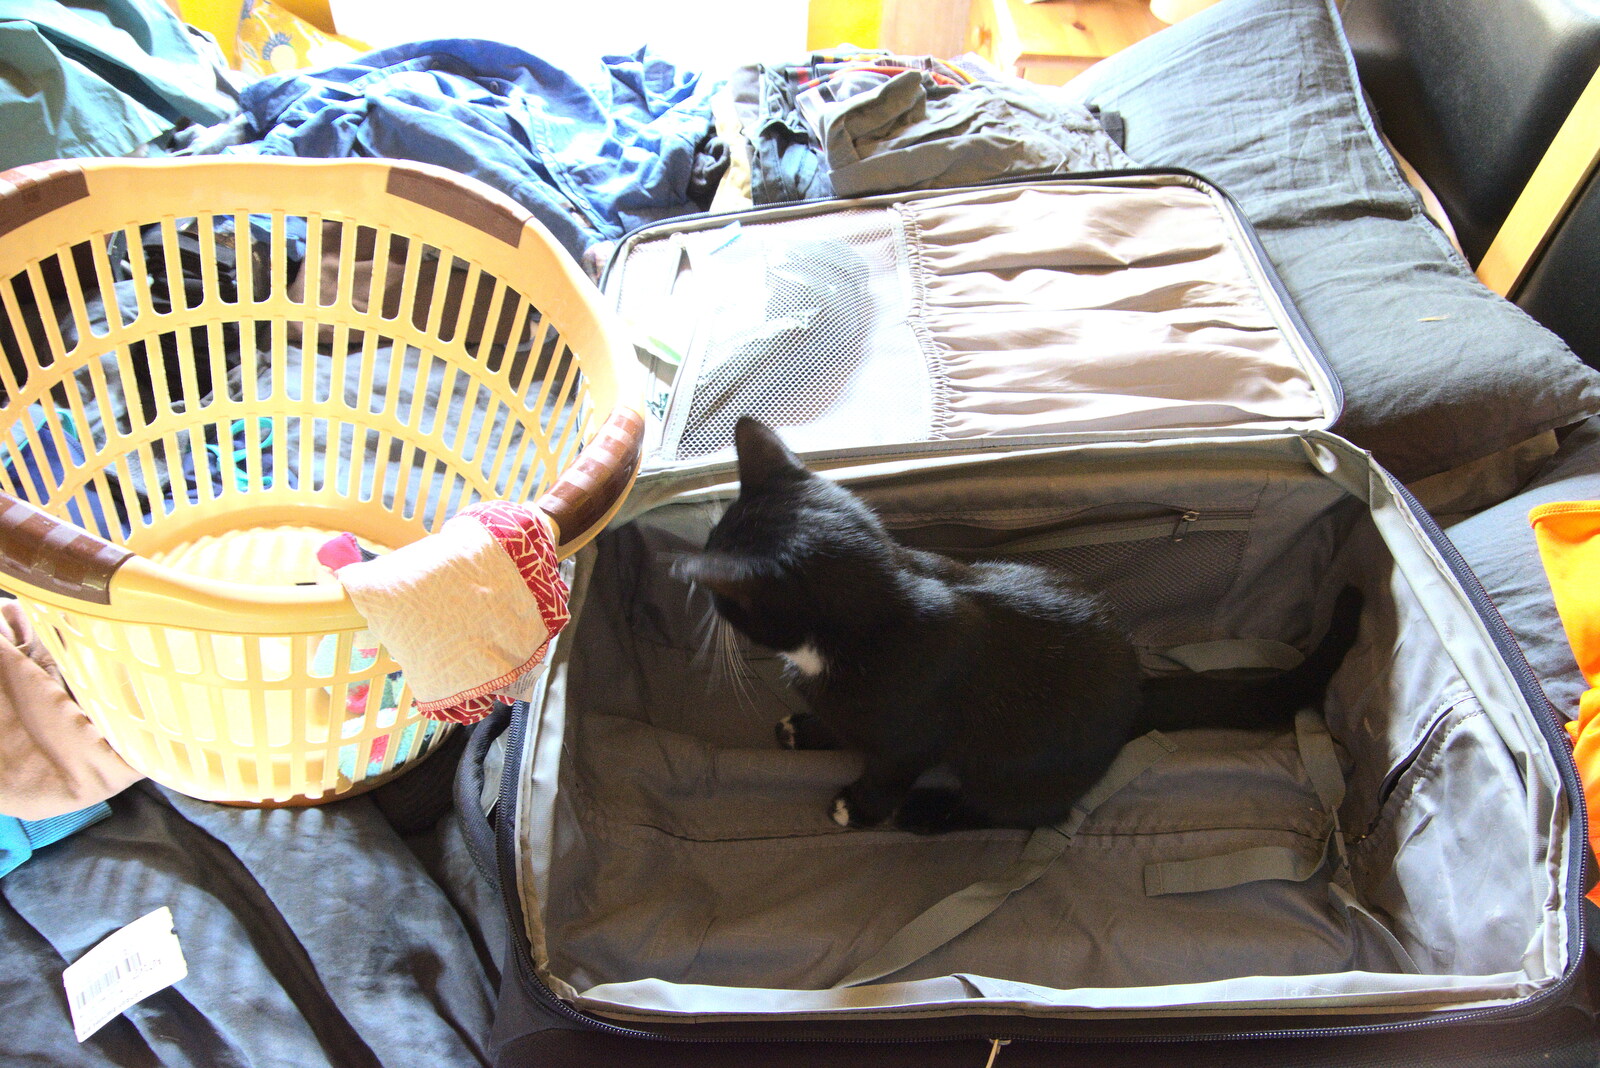 Lucy kitten wants to come too from The Flags of Arezzo, Tuscany, Italy - 28th August 2022